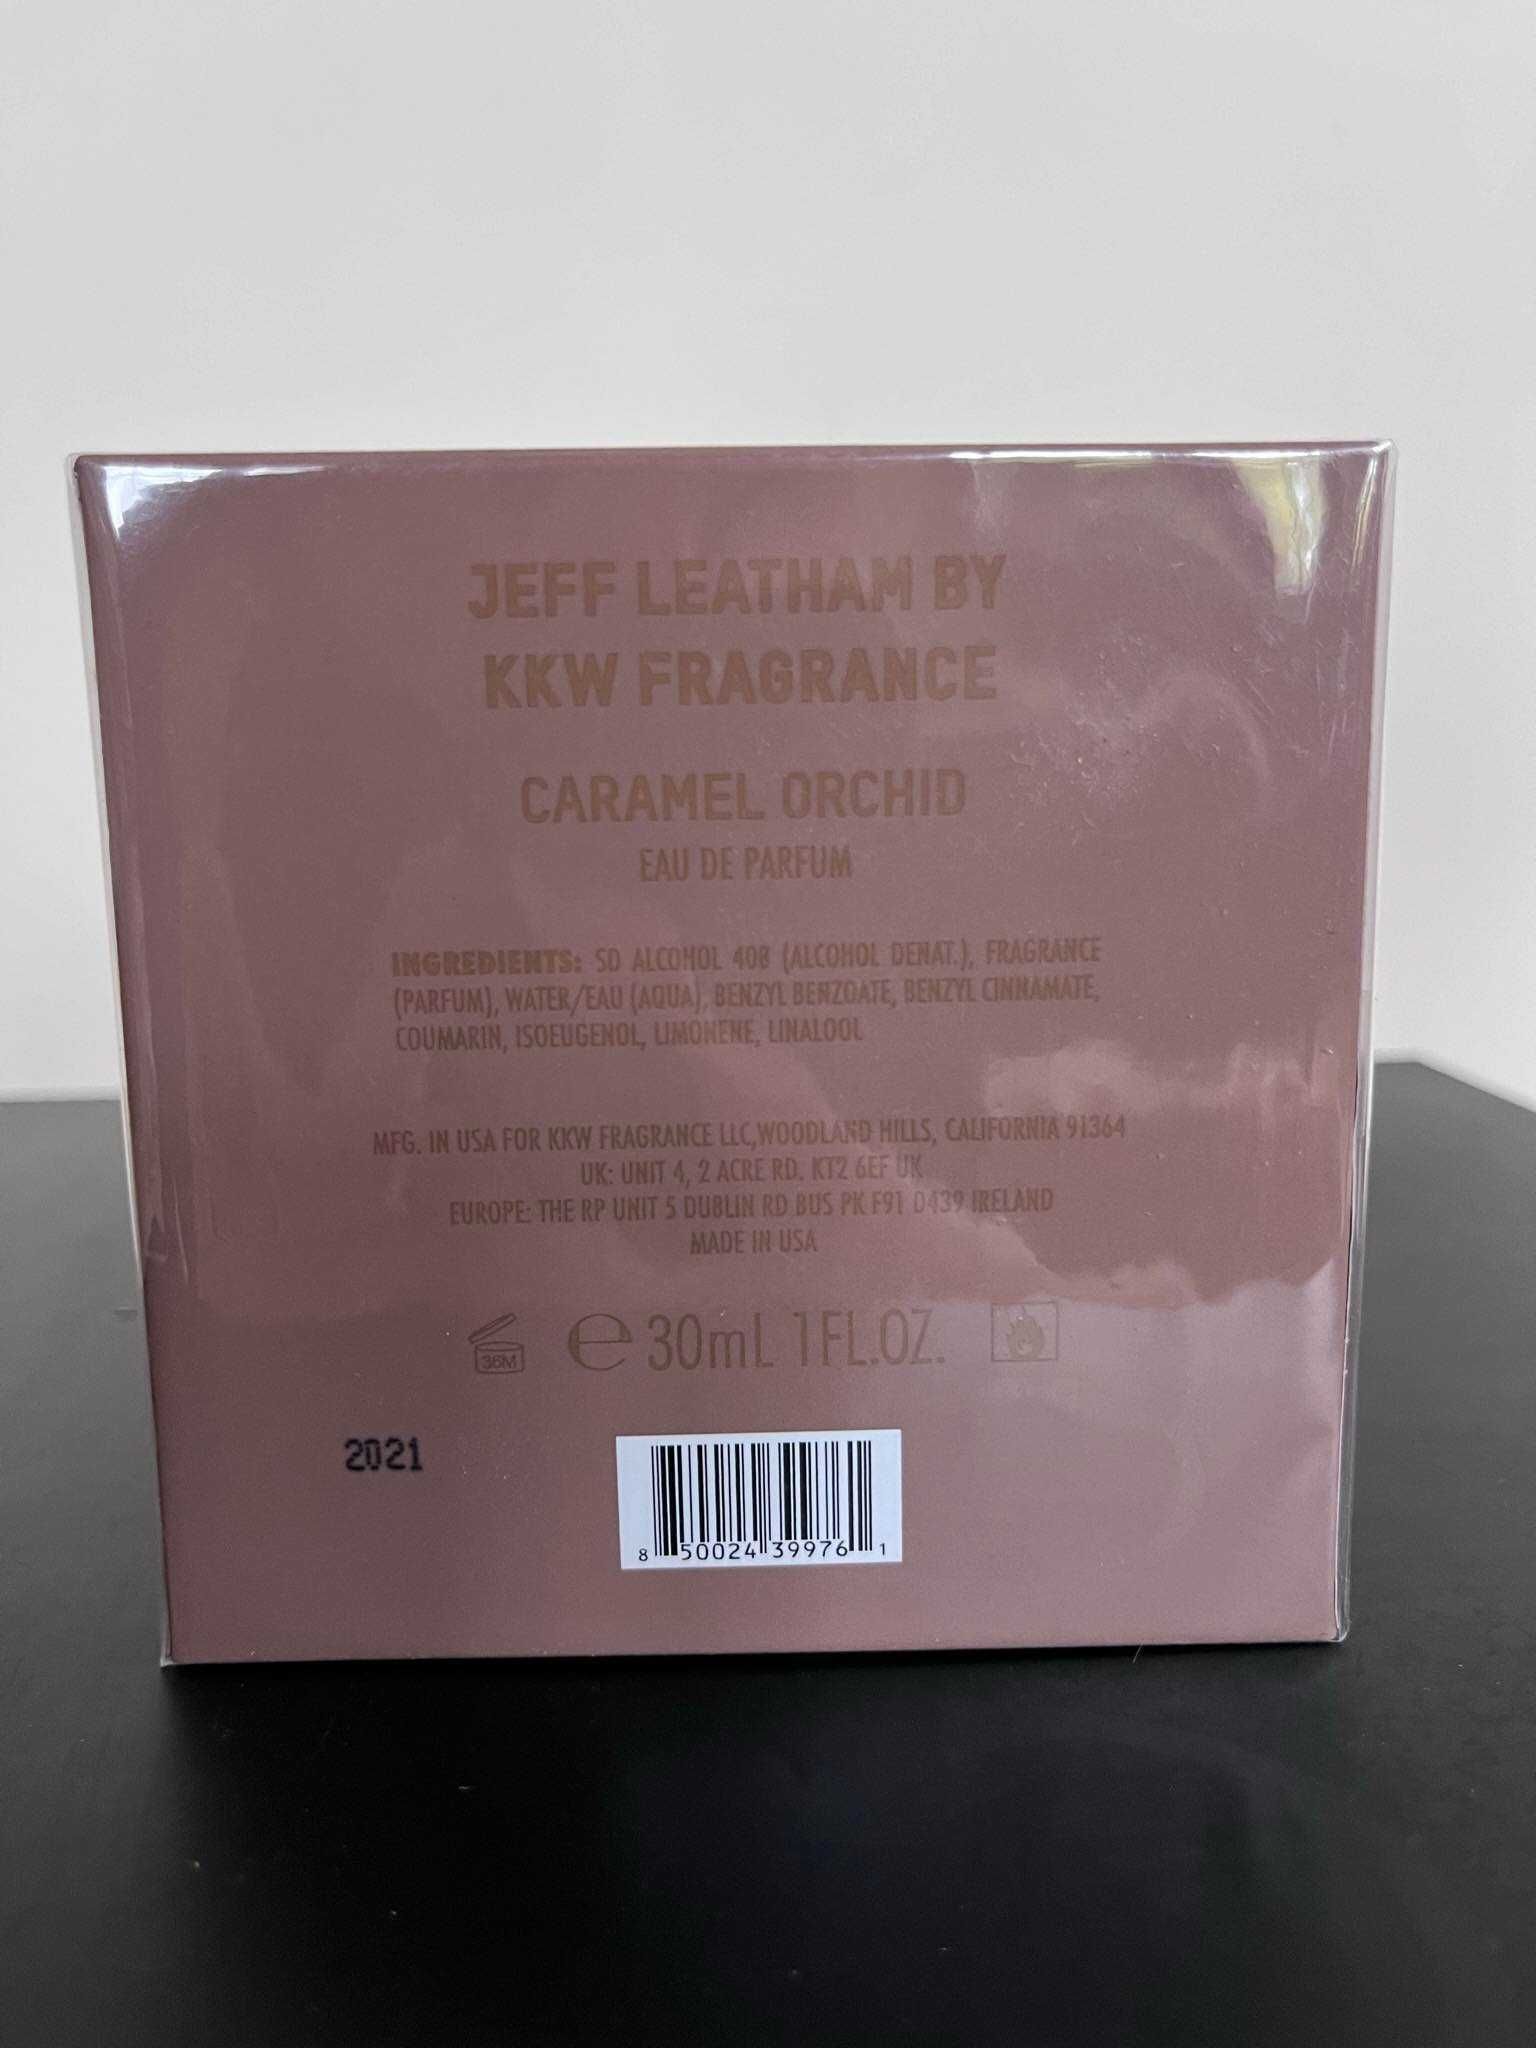 Perfumy Jeff Leatham by KKW Fragrance CARMEL ORCHID